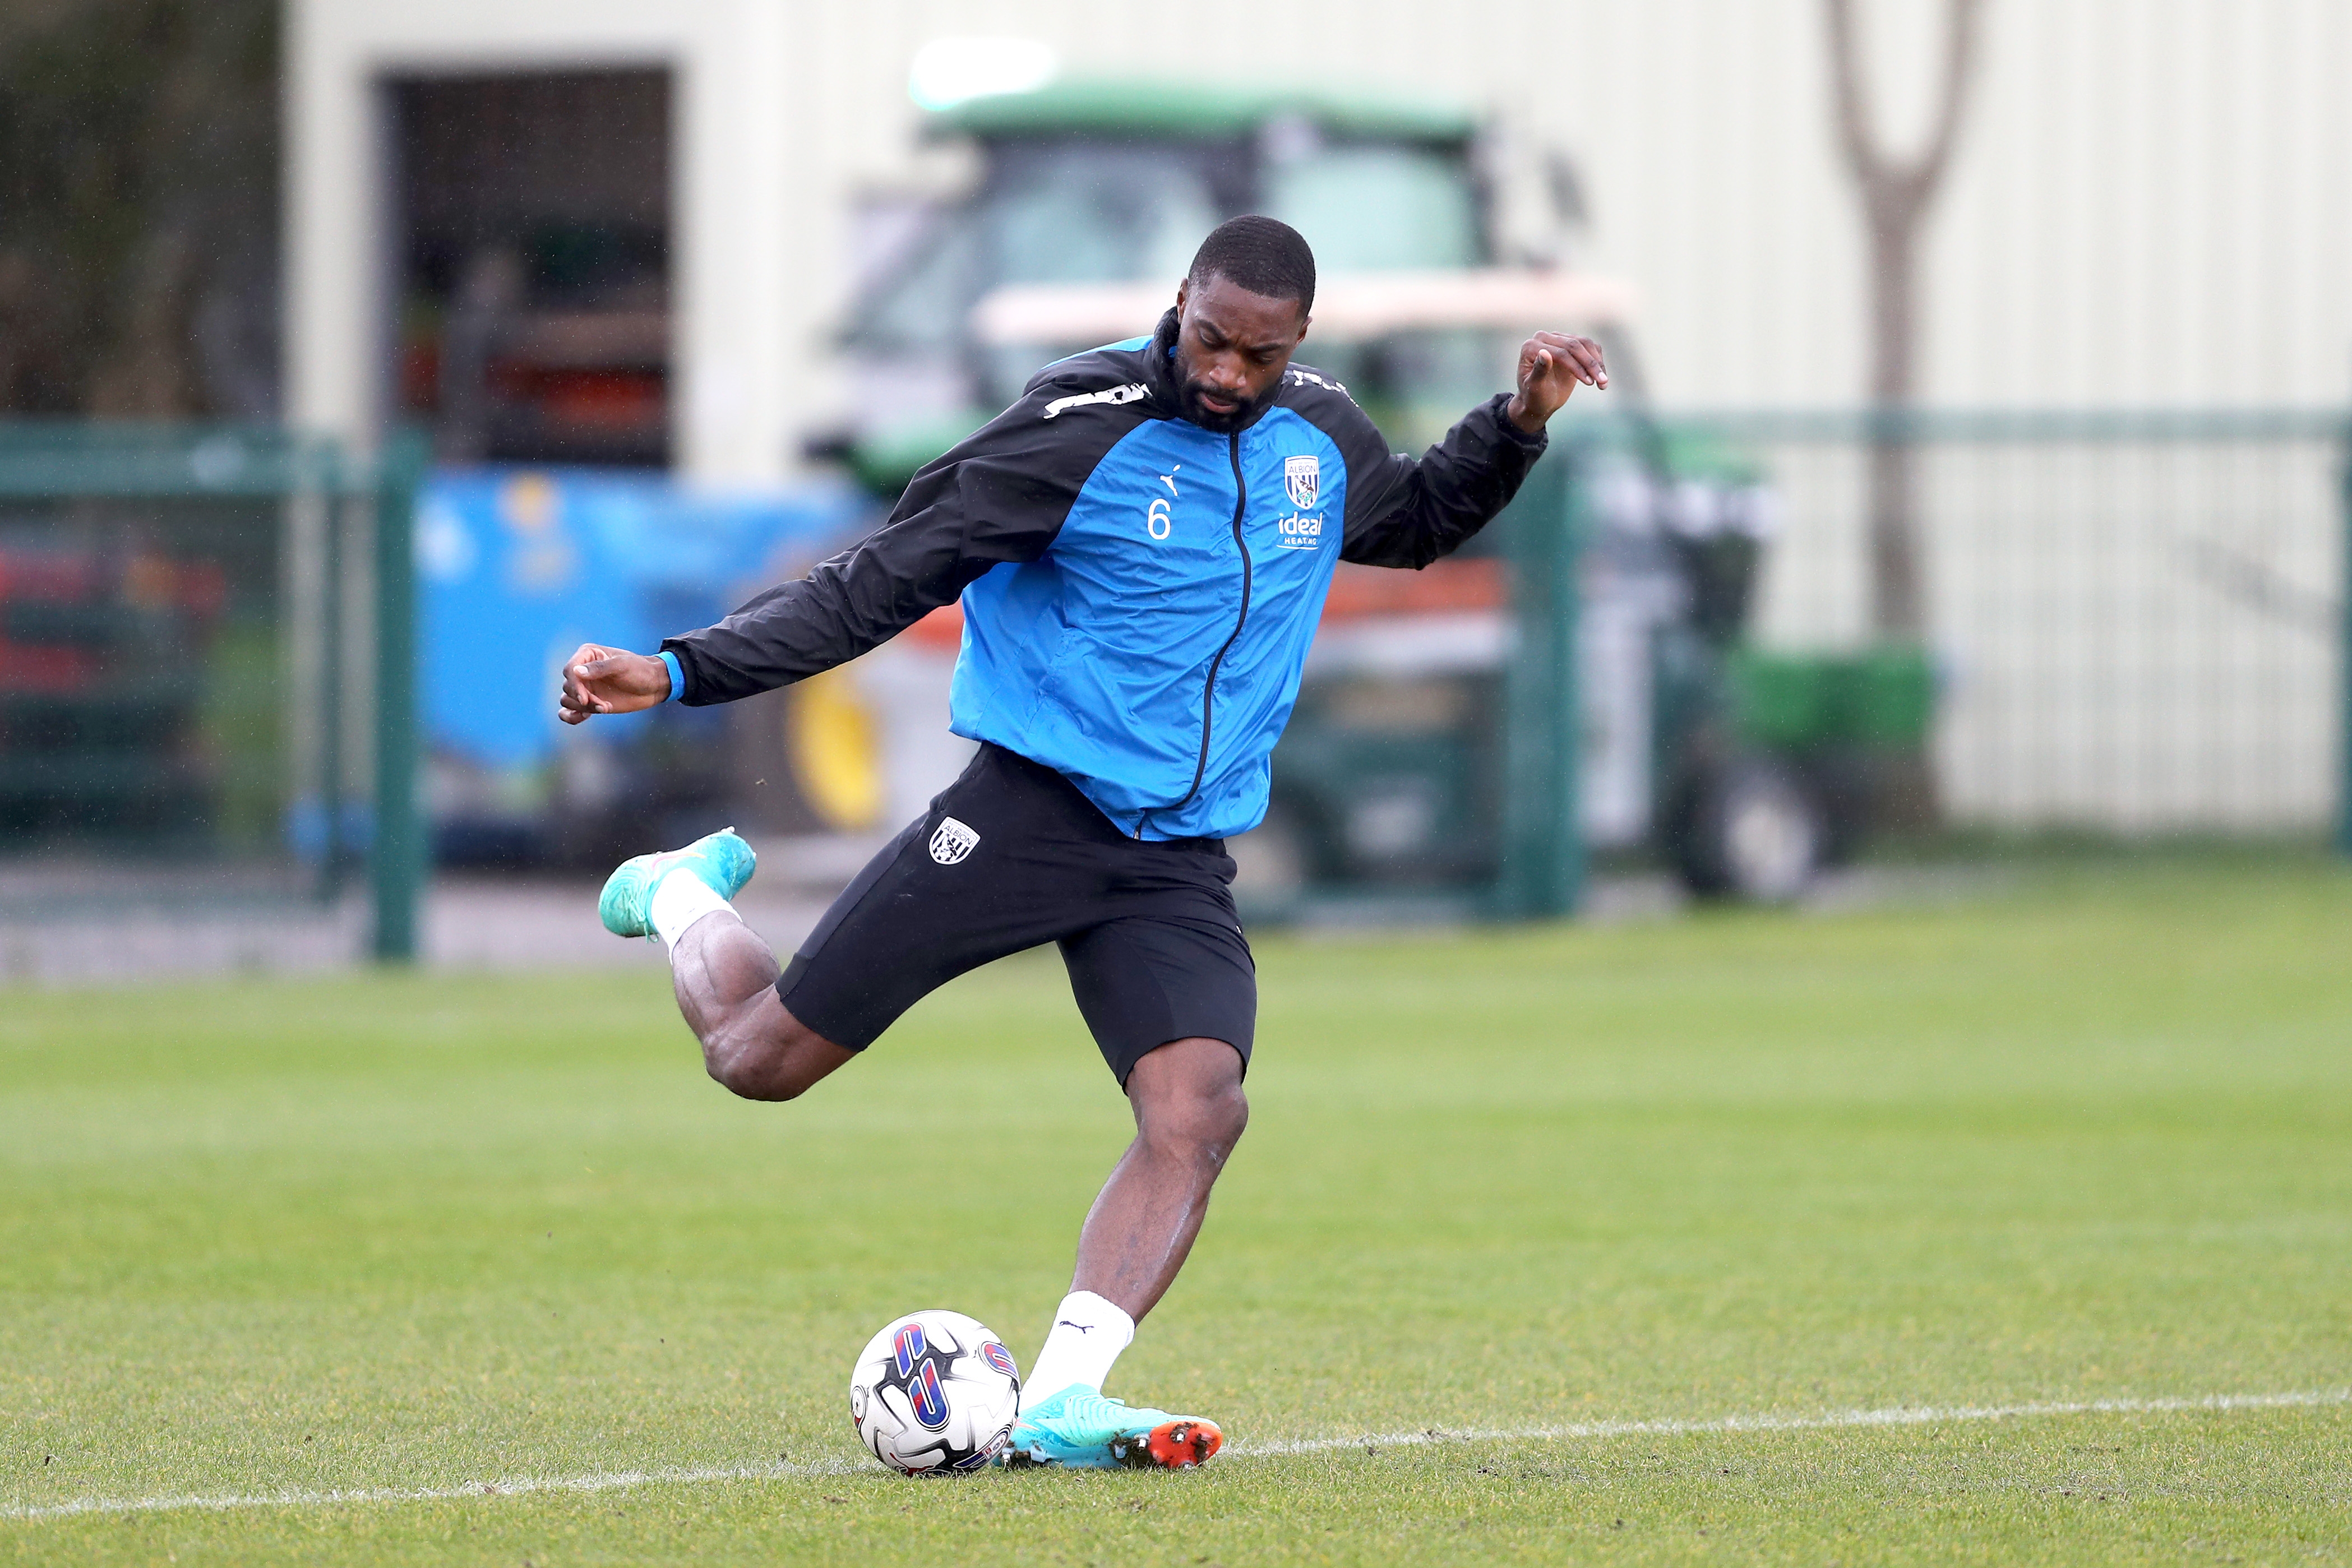 Semi Ajayi strikes the ball with his right foot in training 